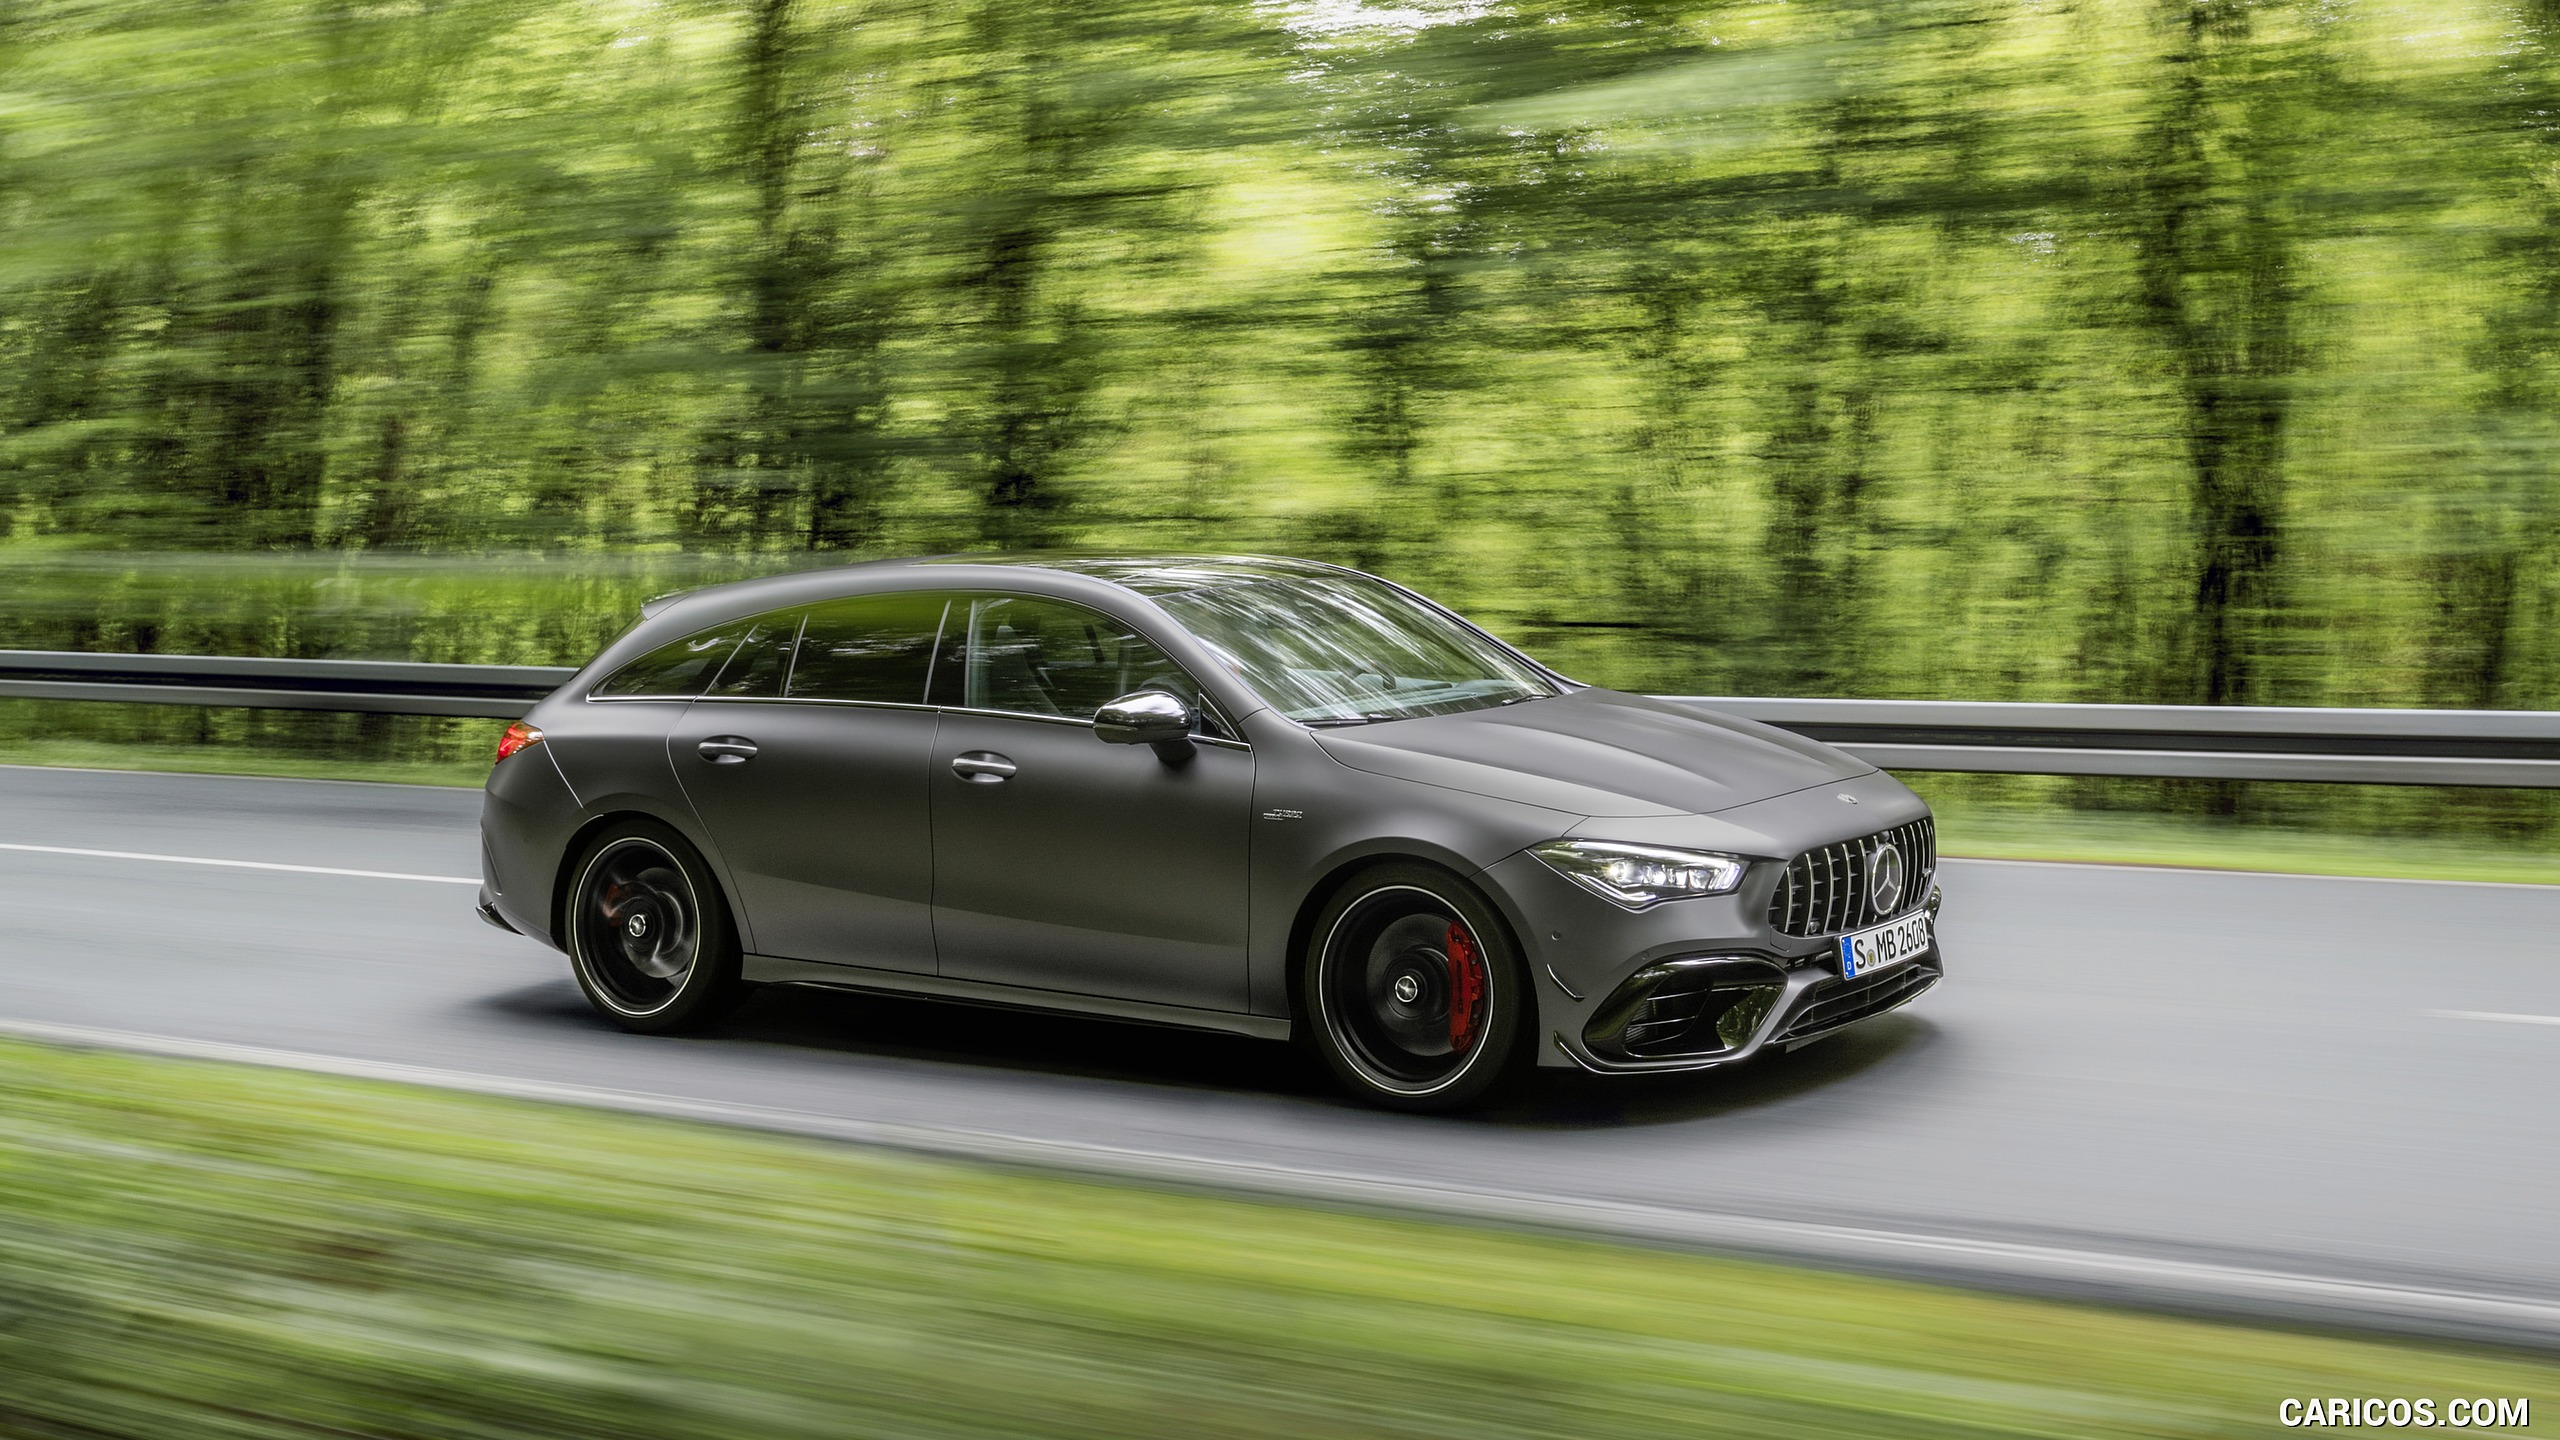 2020 Mercedes-AMG CLA 45 S 4MATIC+ Shooting Brake - Front Three-Quarter, #5 of 35